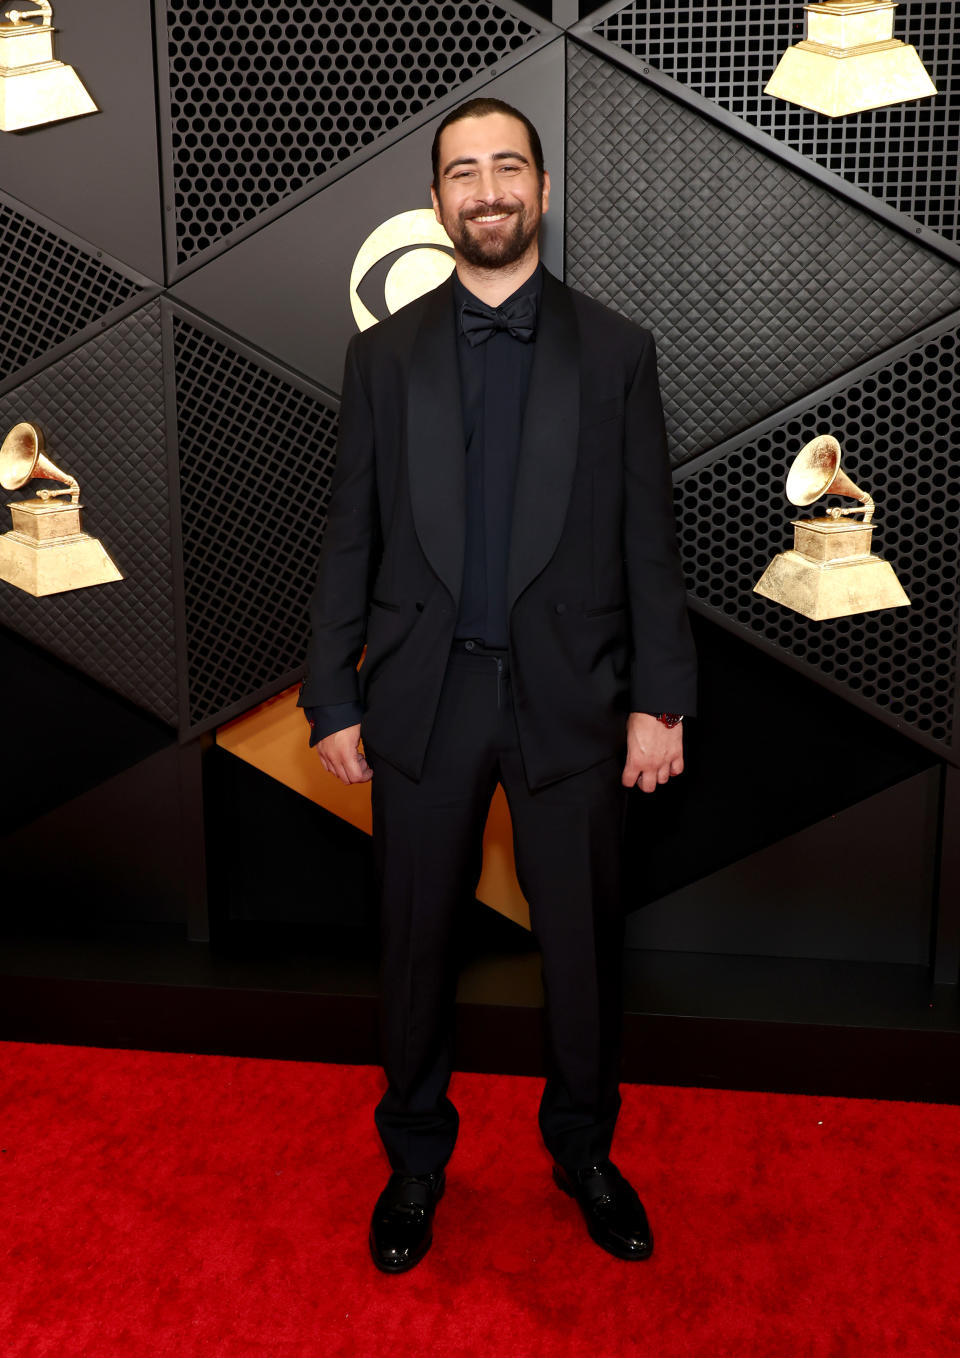 Noah Kahan in a black suit at the Grammys. (Image via Getty Images)